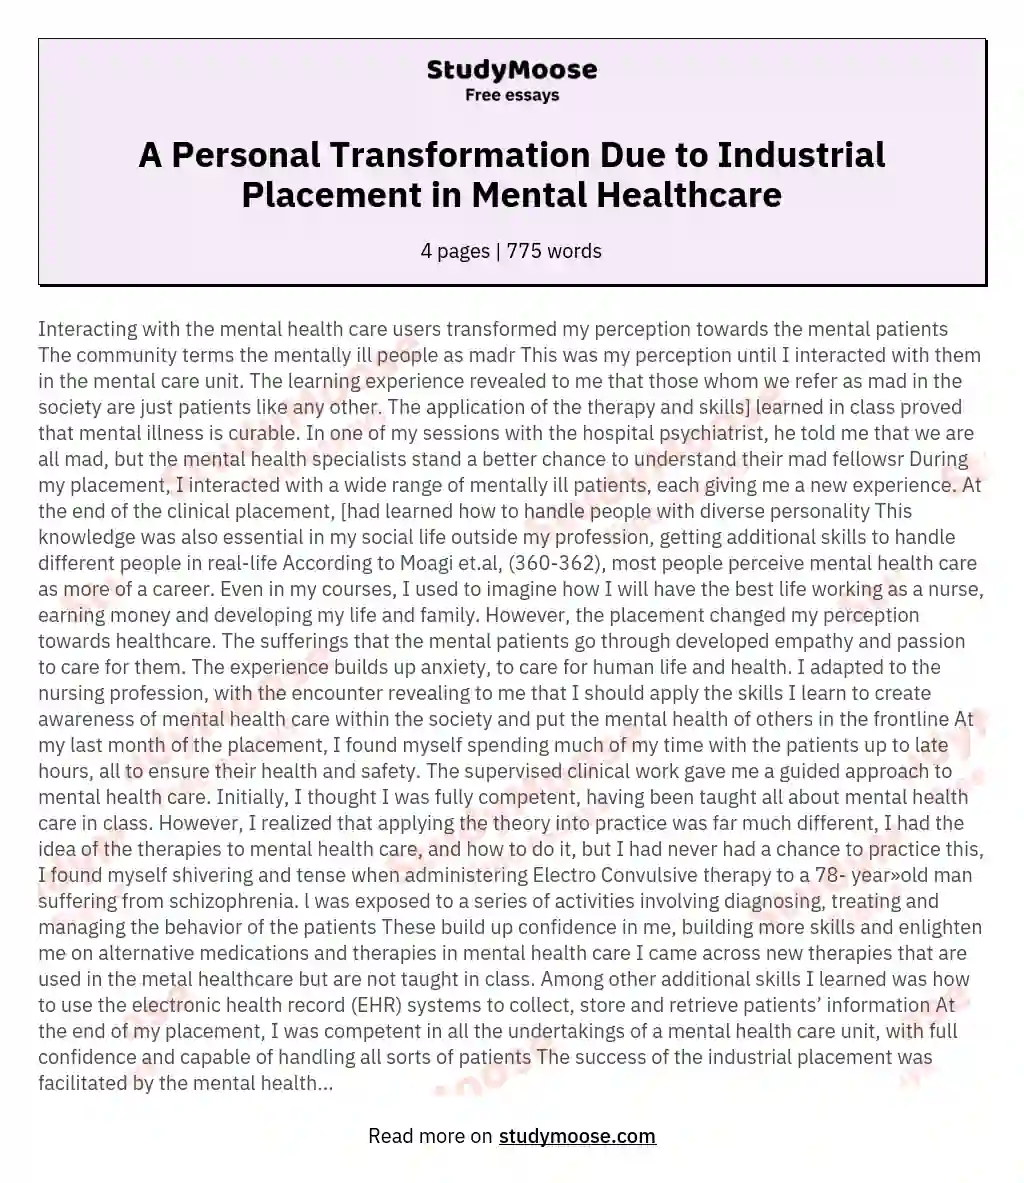 A Personal Transformation Due to Industrial Placement in Mental Healthcare essay